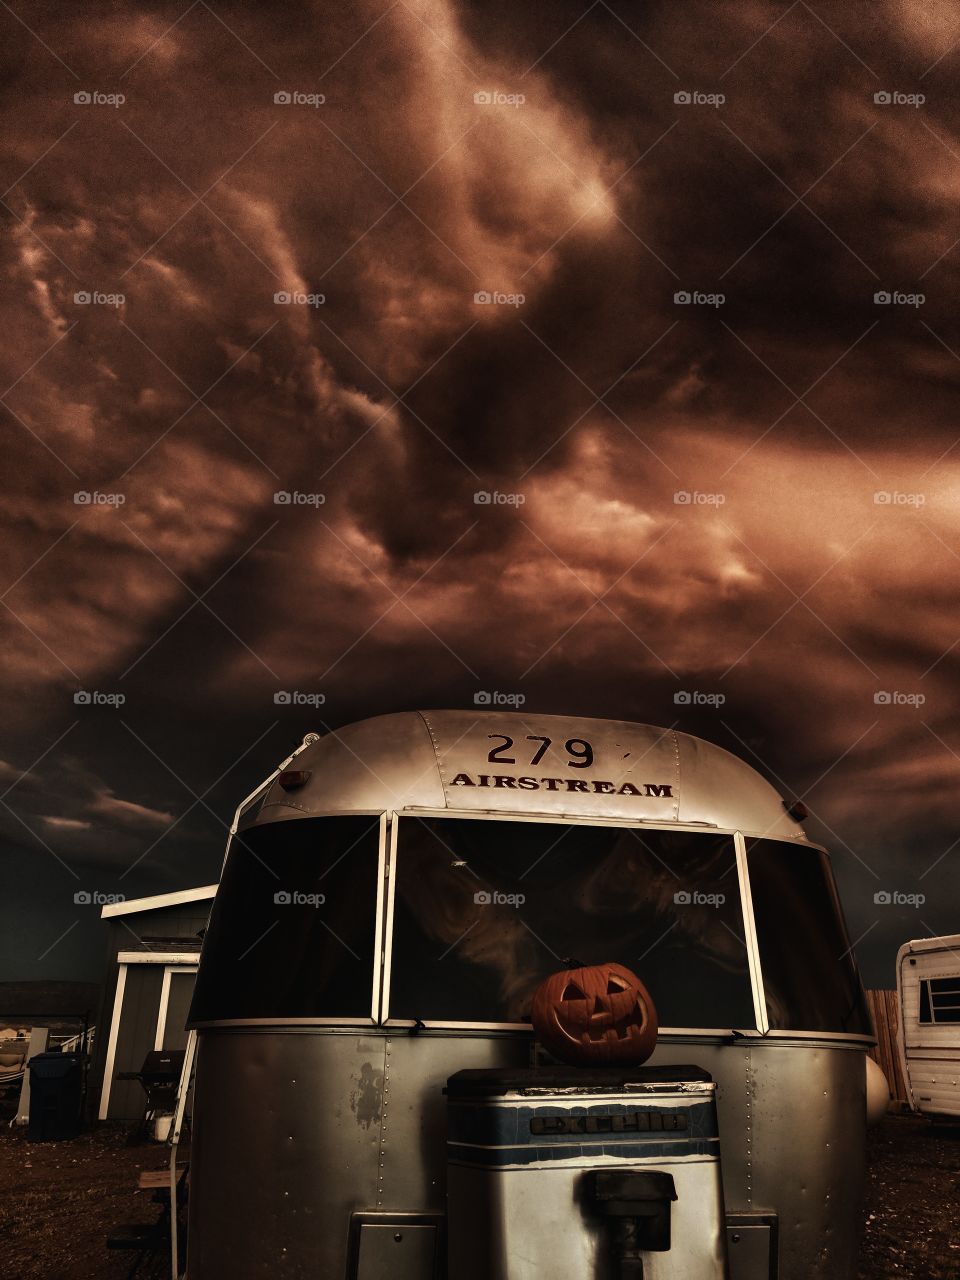 Autumn Airstream after the storm beneath apocalyptic skies.